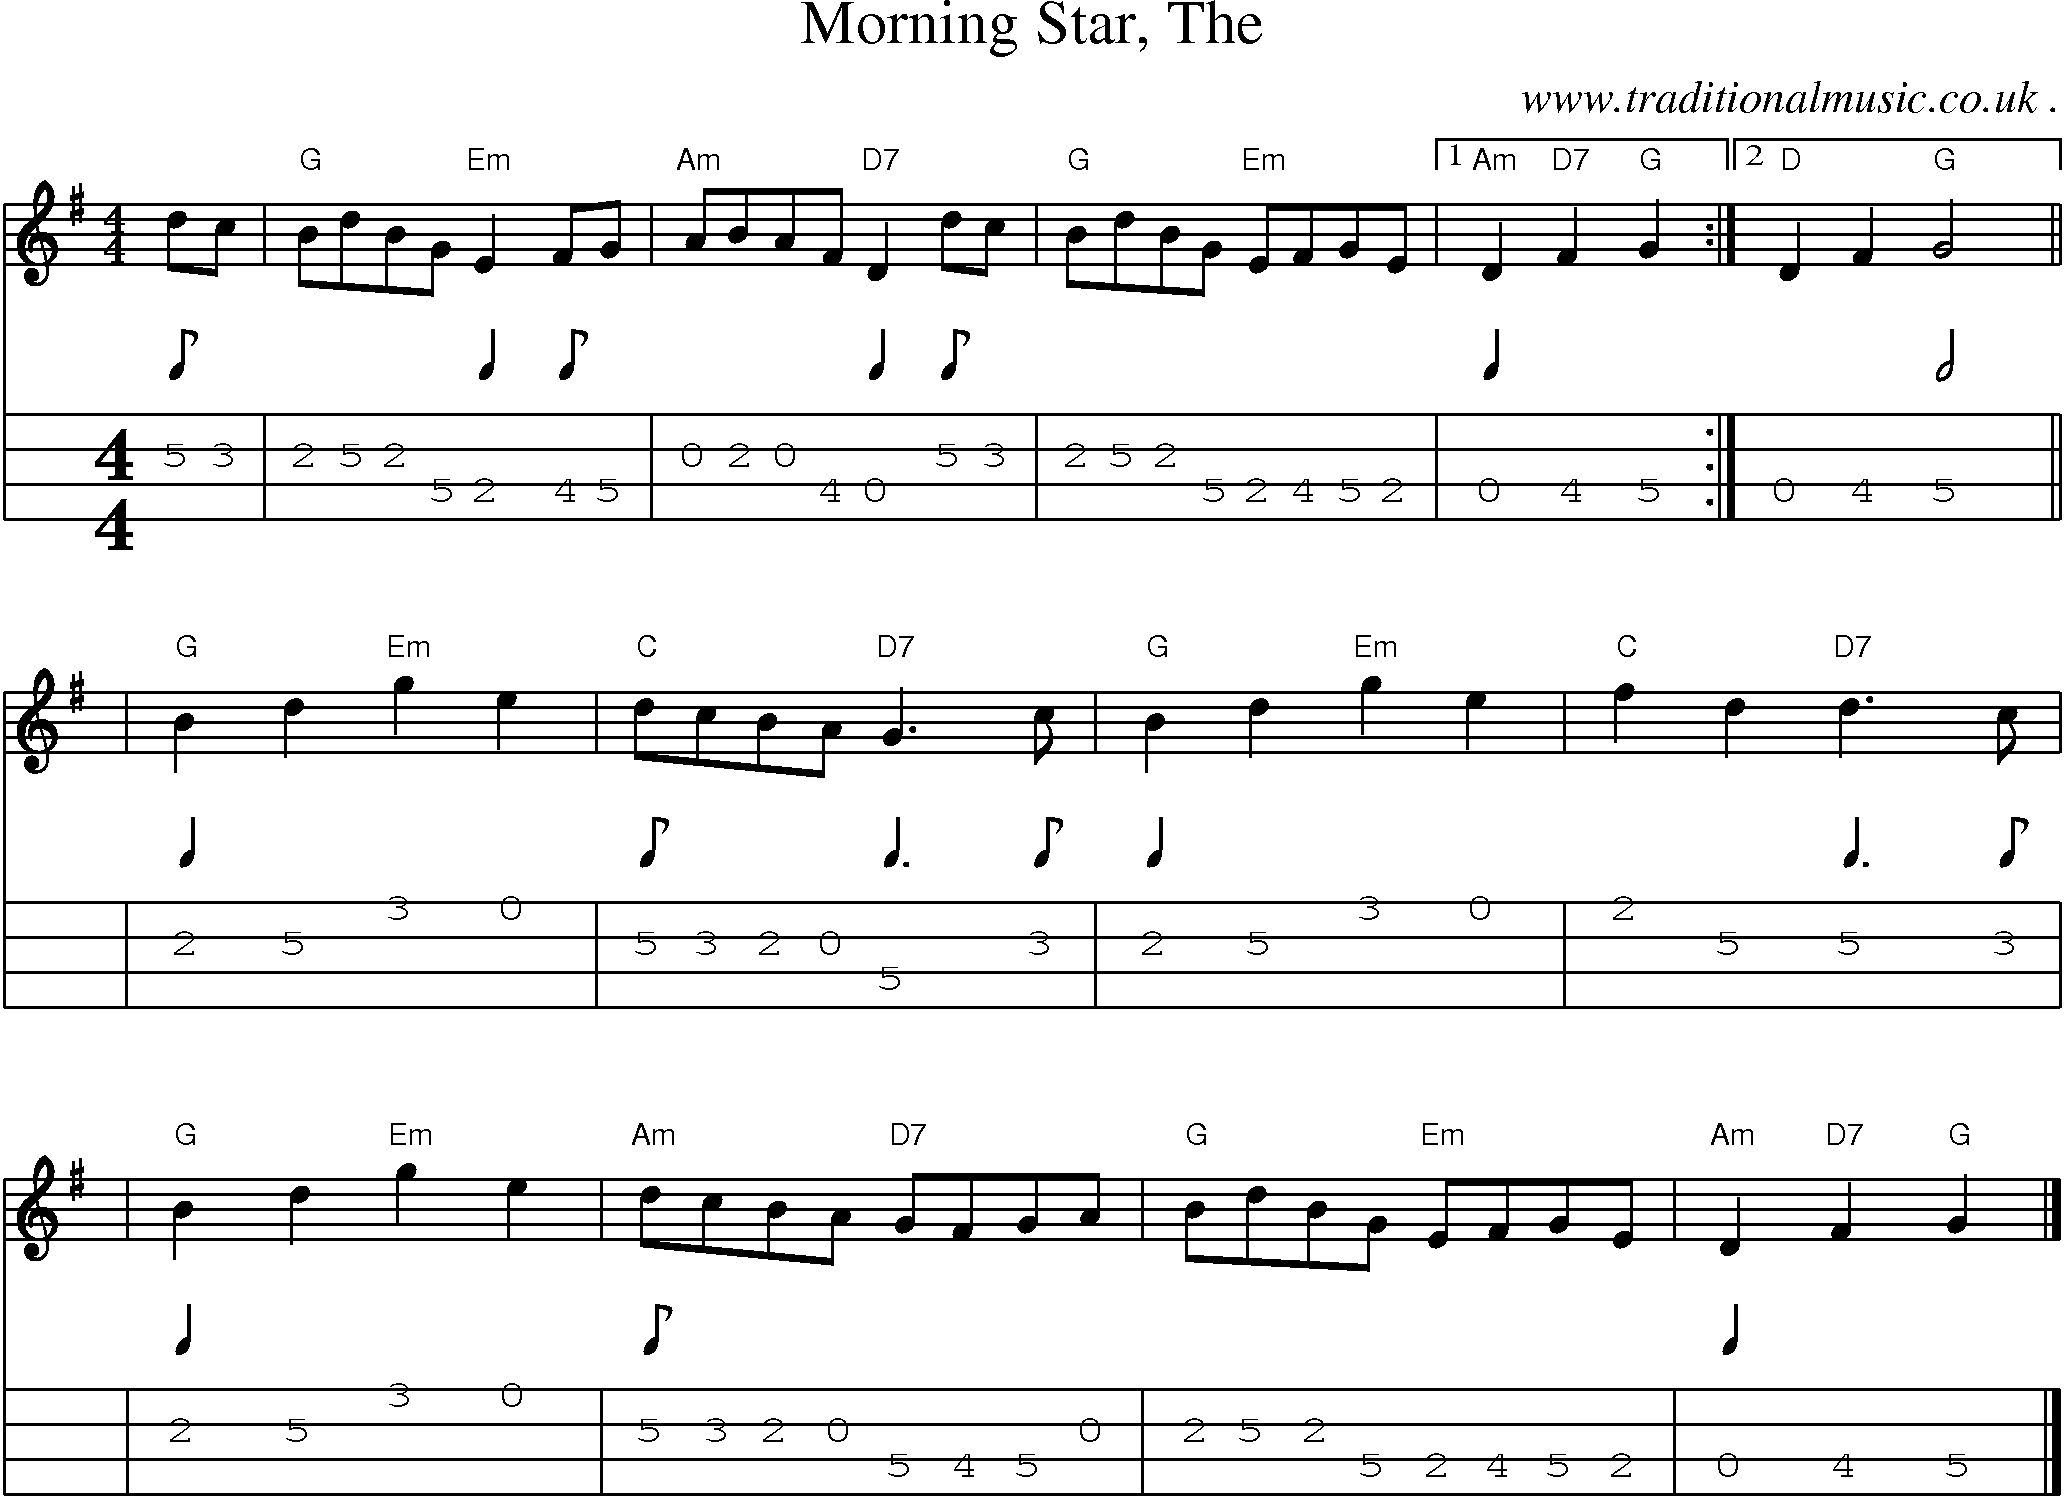 Music Score and Guitar Tabs for Morning Star The